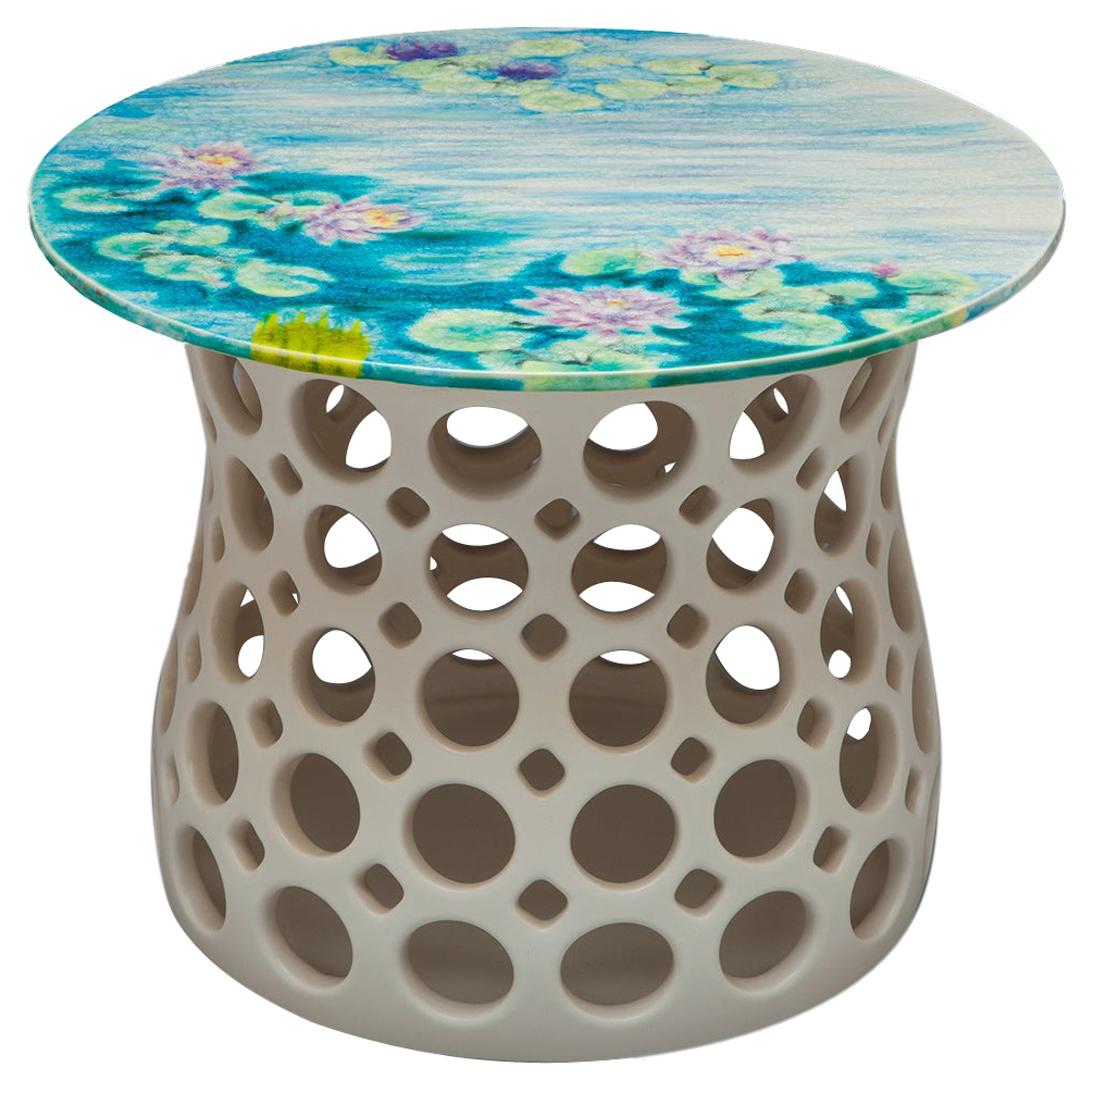 Pierced Ceramic Side Table-Turquoise Lily Pad Motif